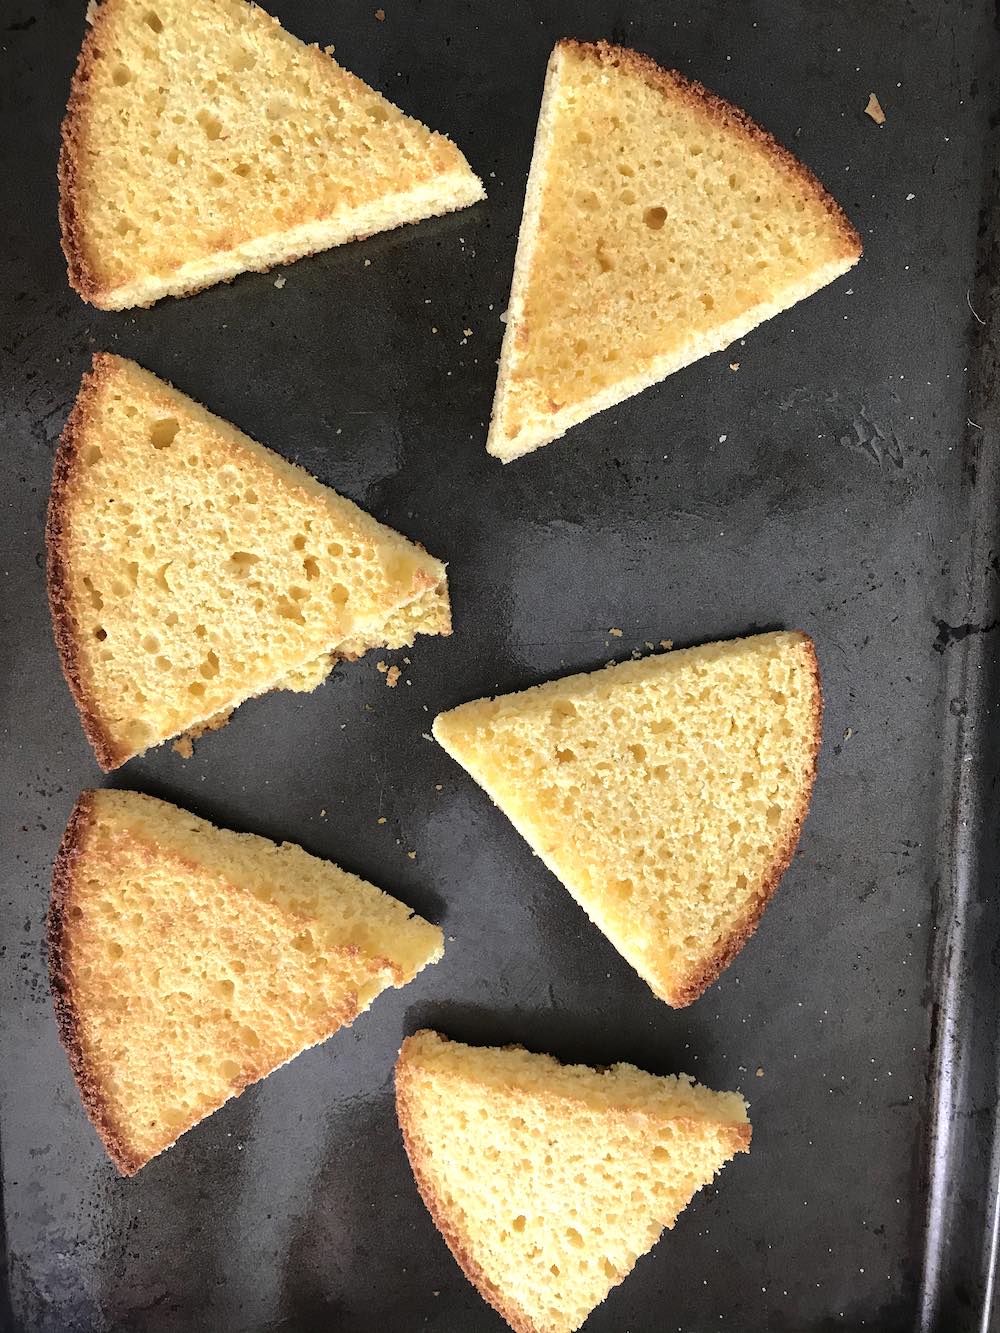 Cornbread toasted under a broiler until brown and crispy. 